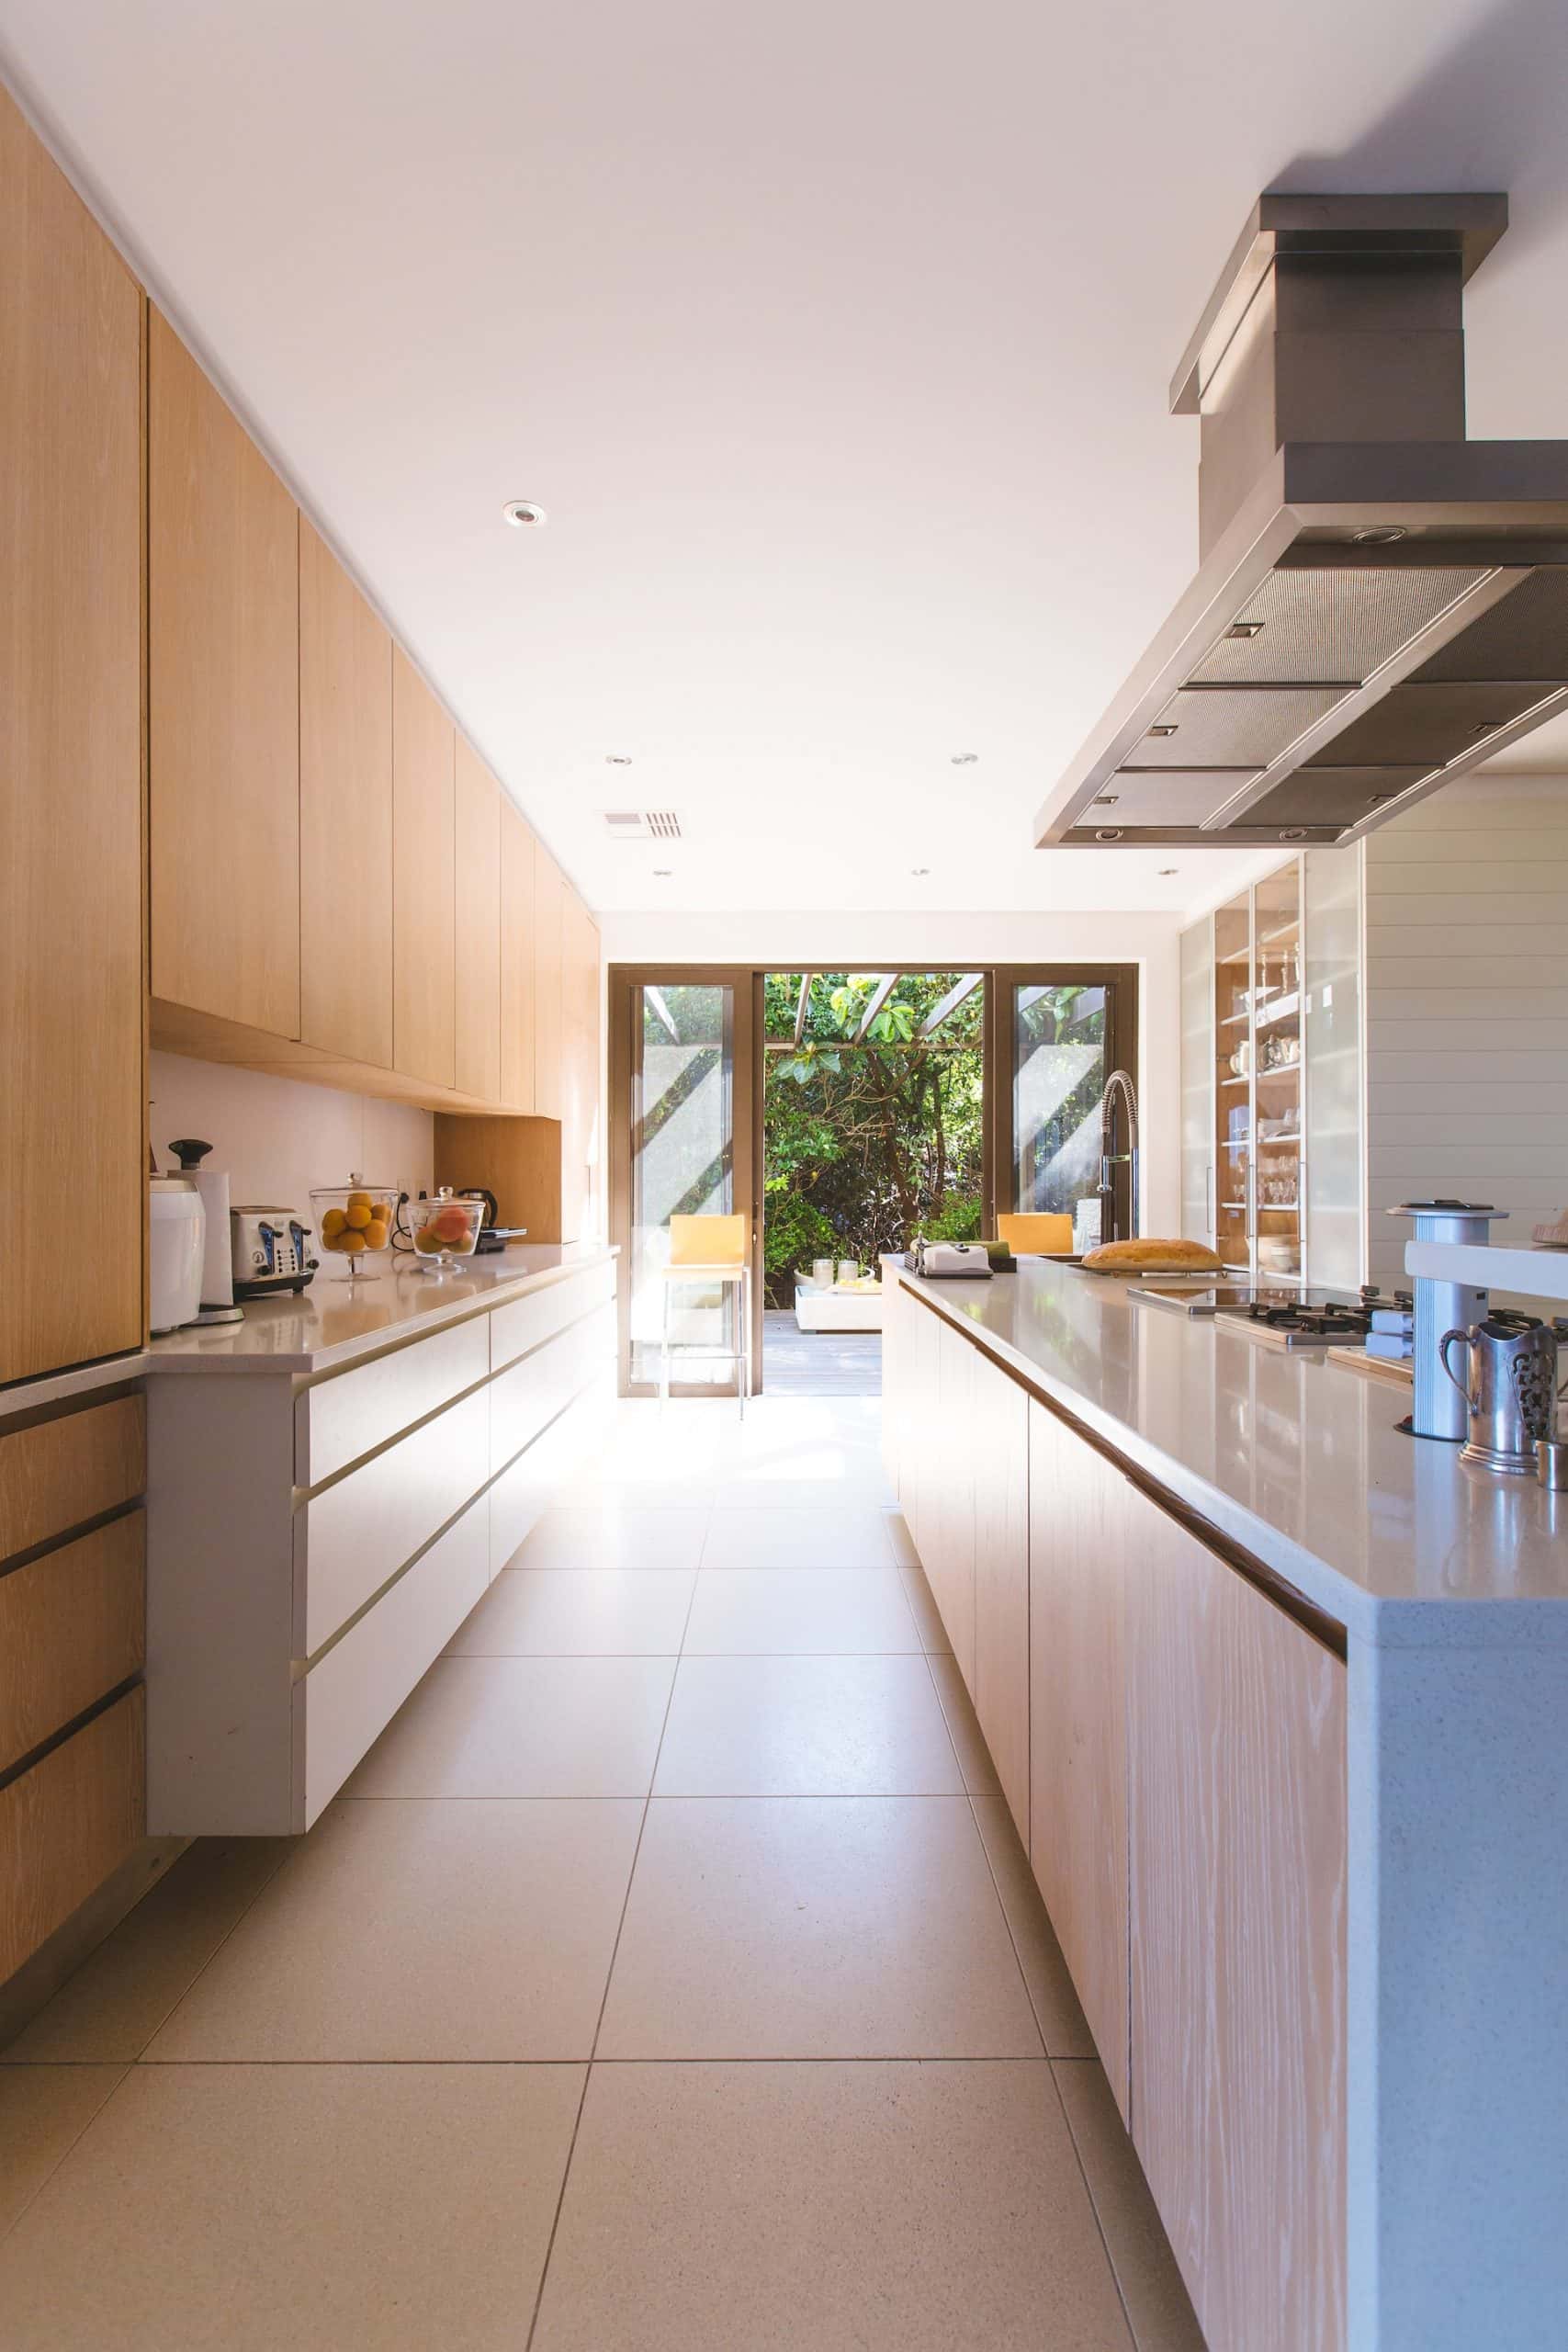 How to Design a Smart Kitchen